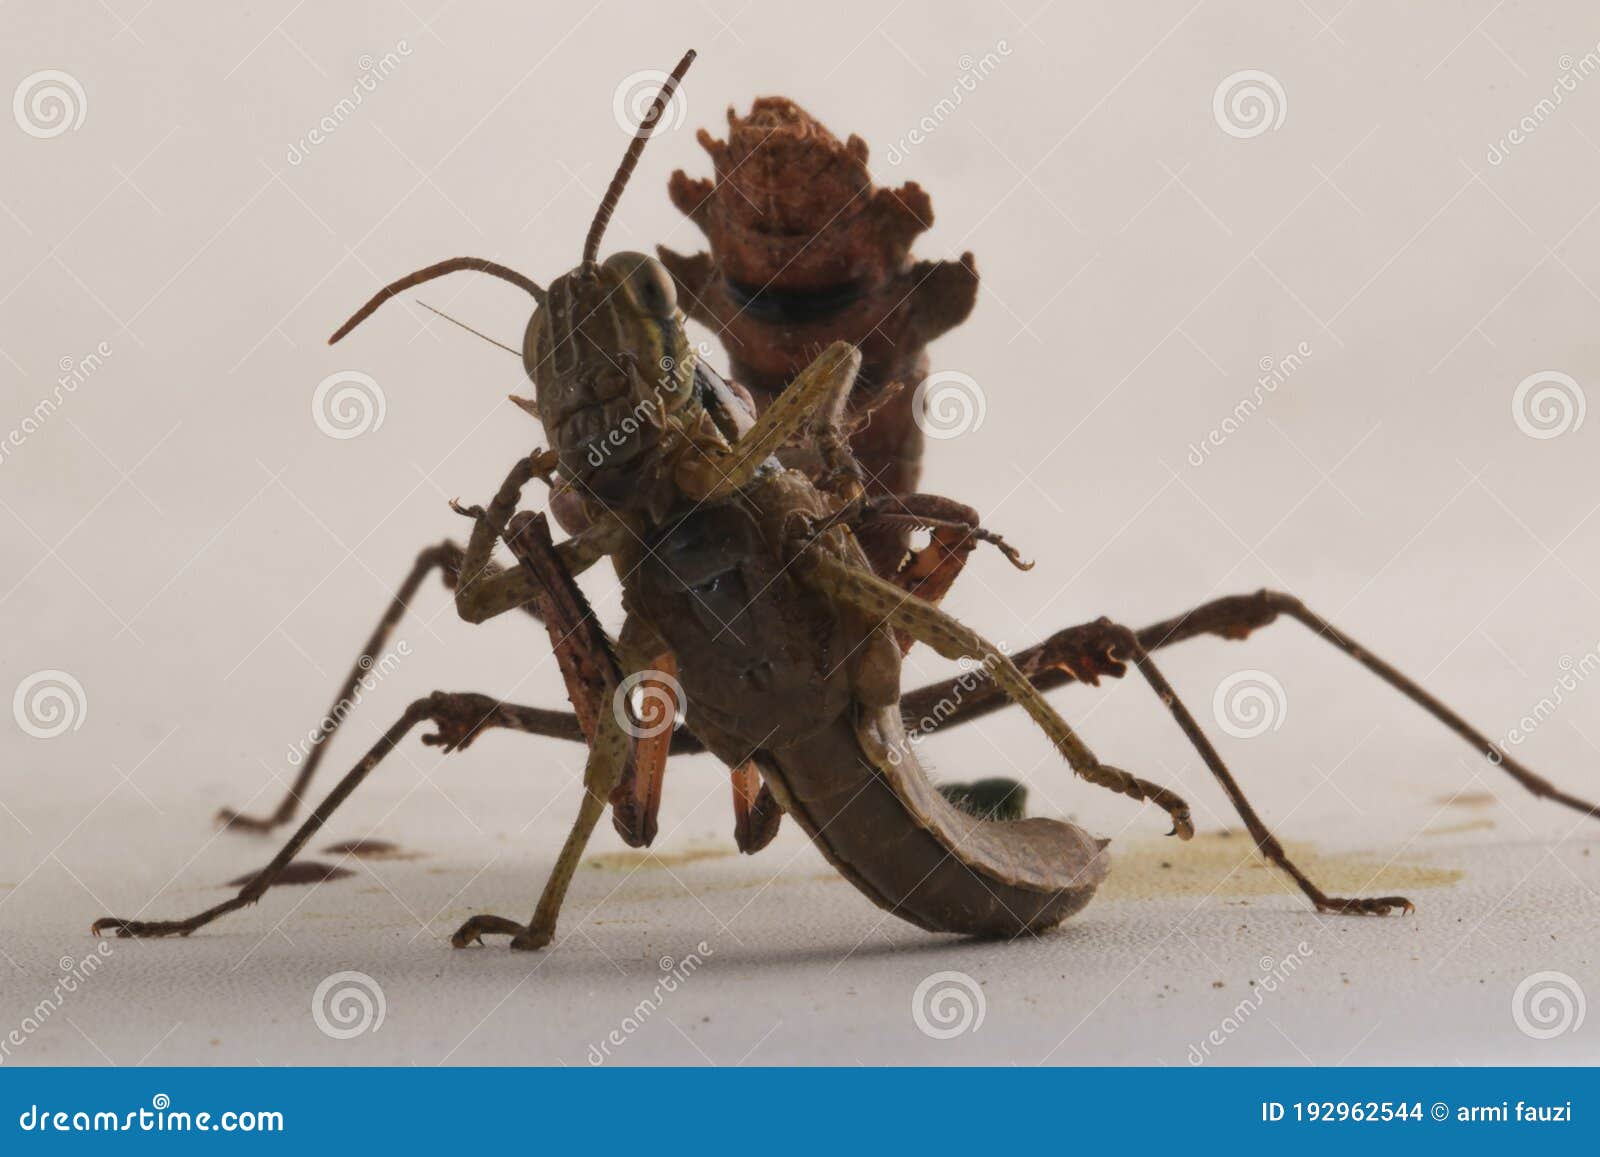 grasshoper controlled by mantis